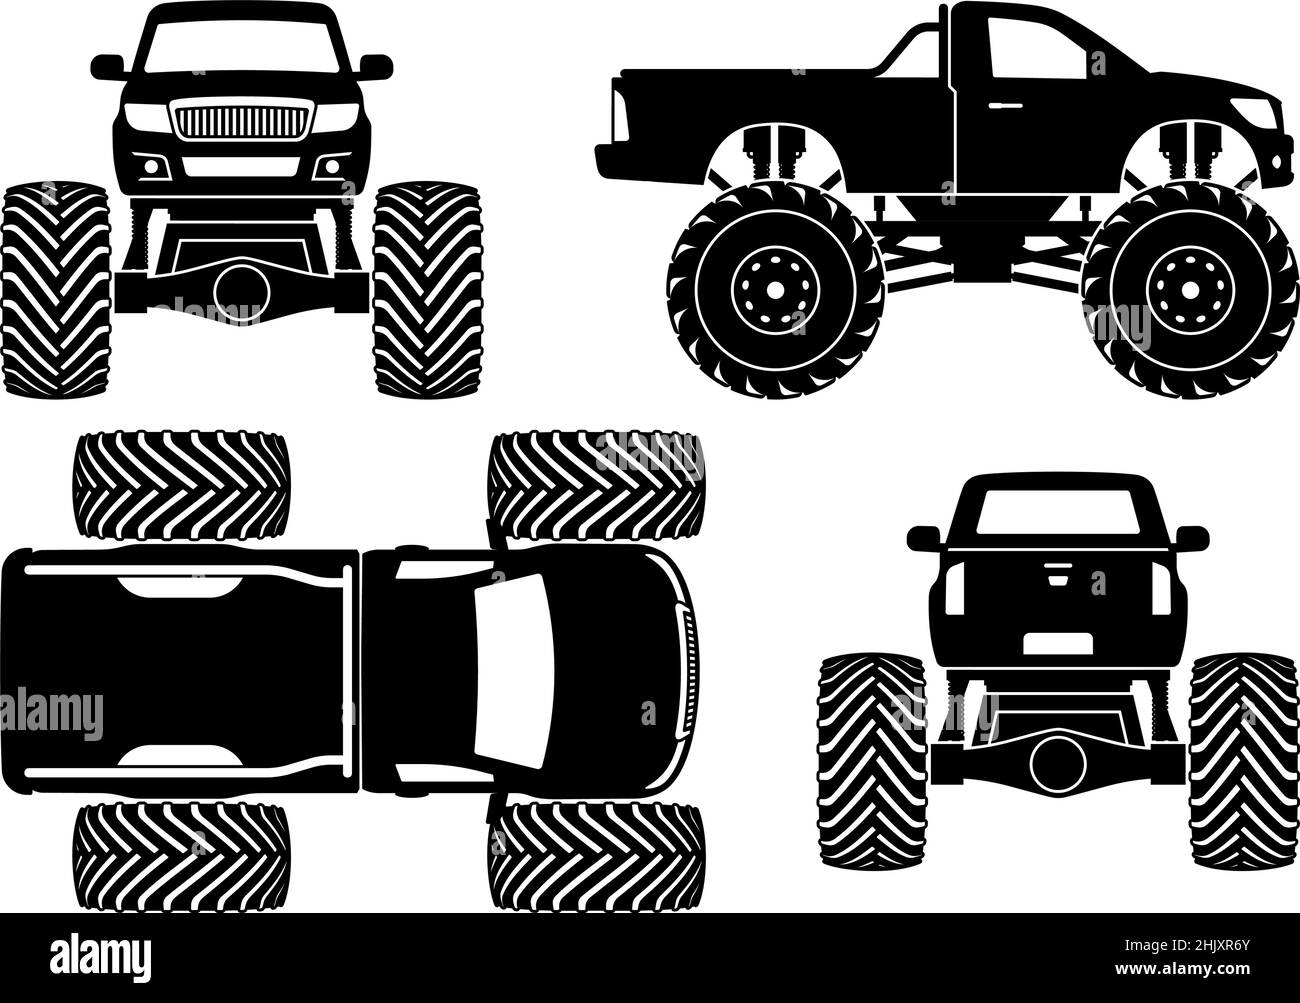 Monster truck silhouette on white background. Bigfoot car monochrome icons set view from side, front, back, and top Stock Vector